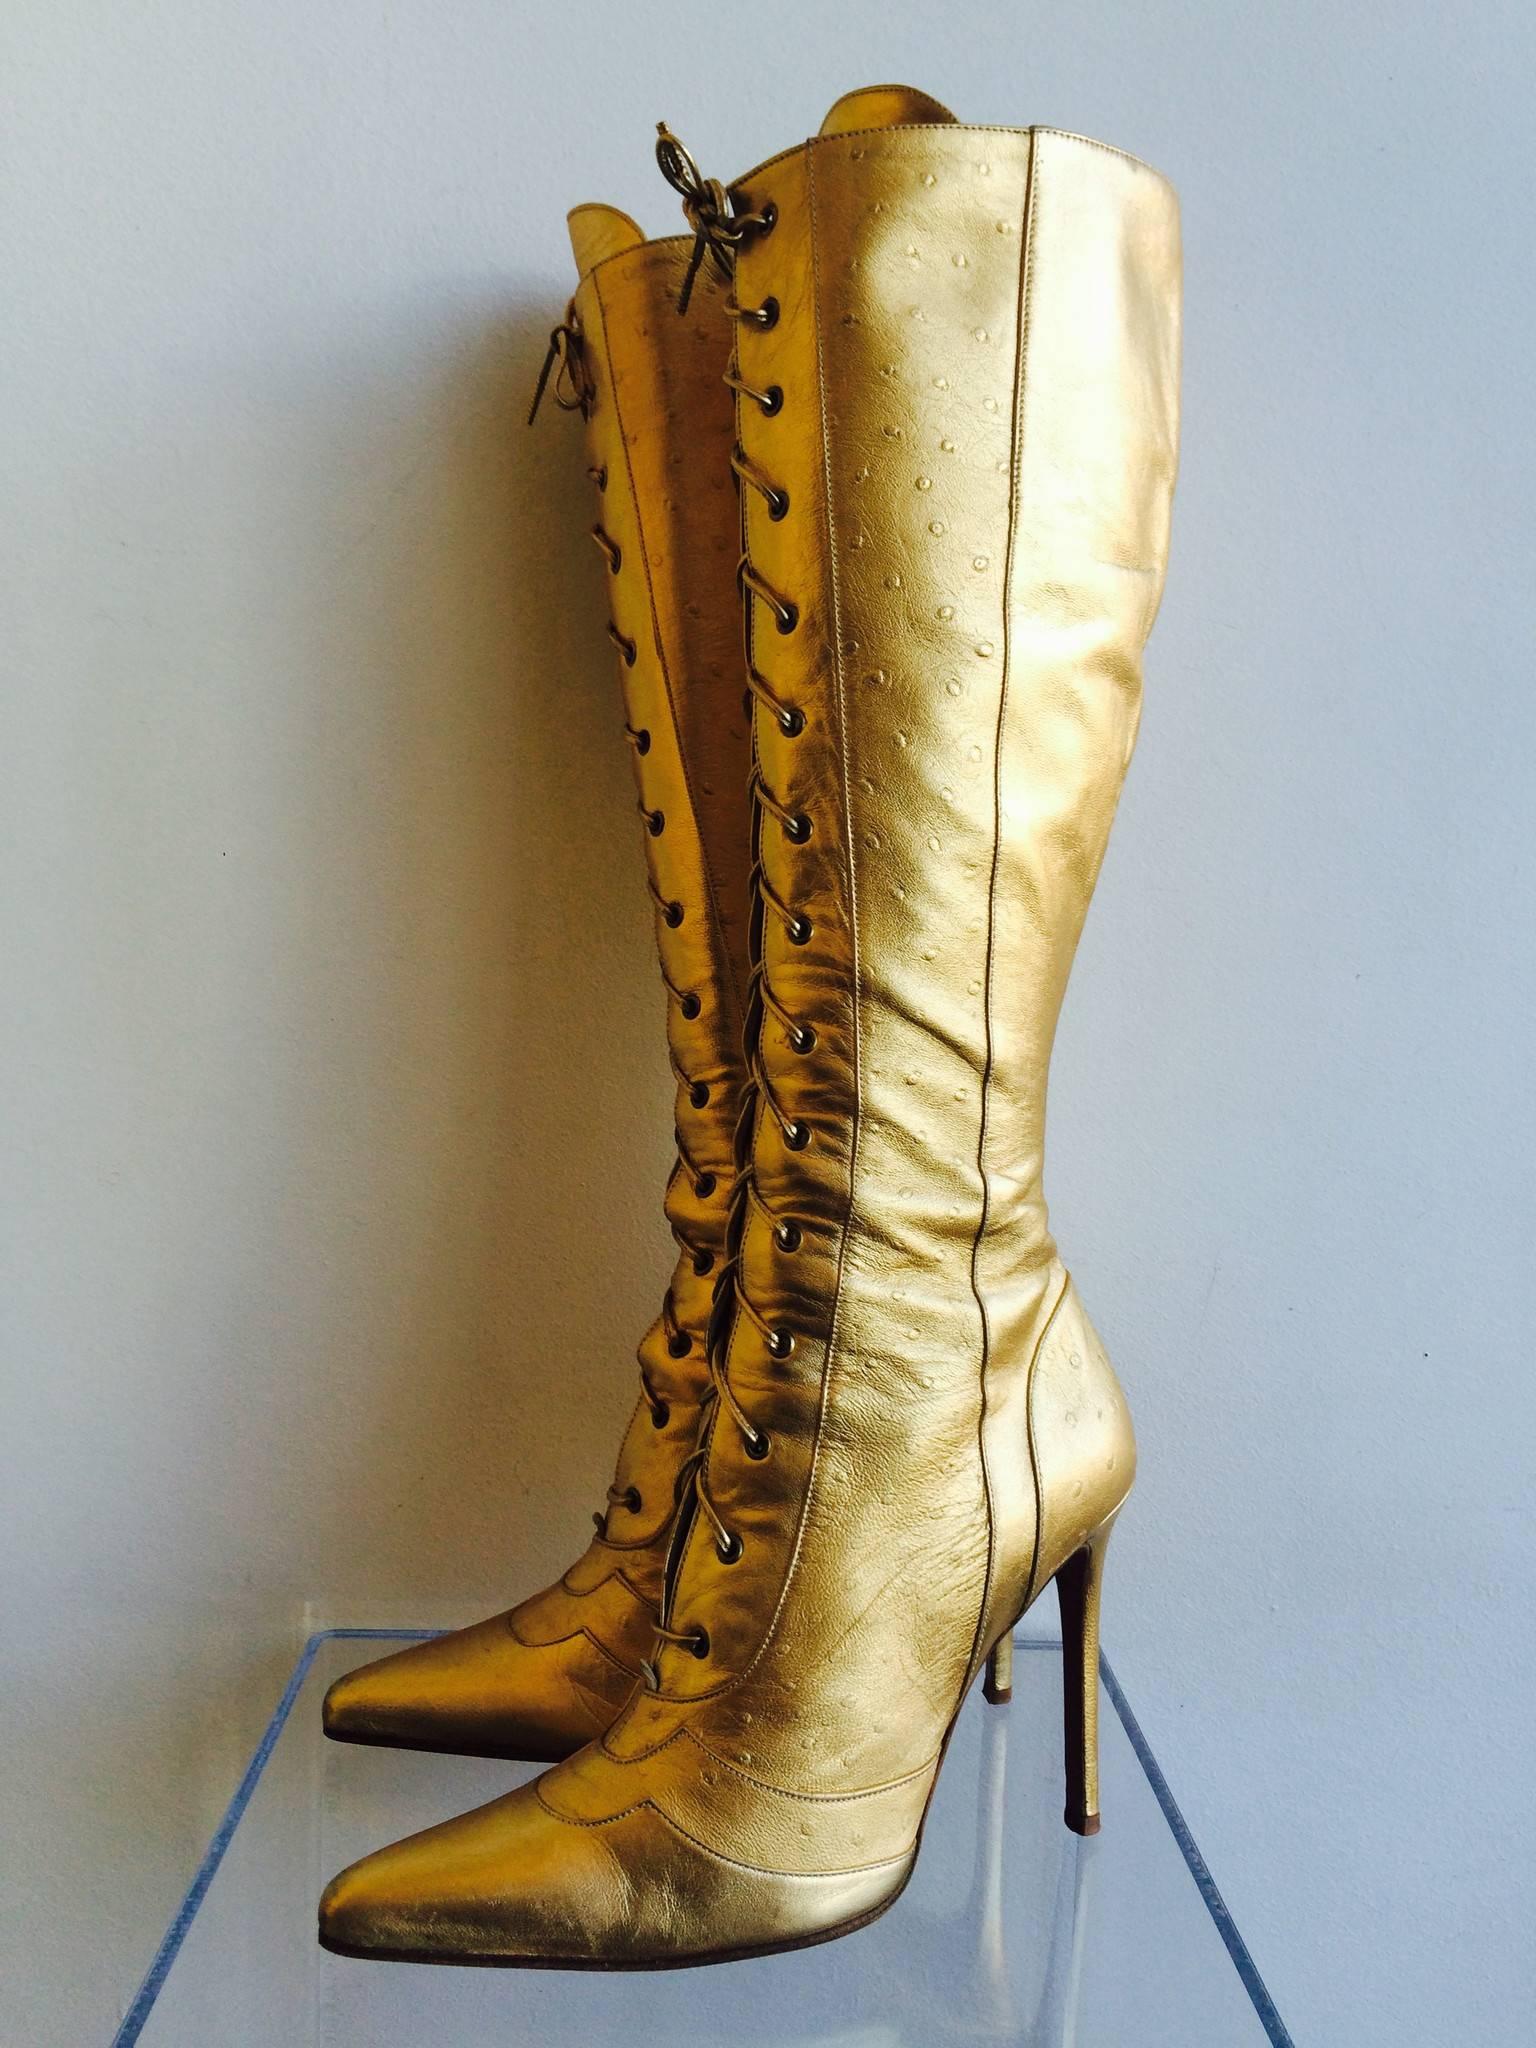 Christian Dior gold ostrich leather lace up boots with pearl colored leather lining. These boots come with a lace up front and side zipper for easy fitting. 

Made in Italy

Size Marked: 7, Heel Height: 4"

Good Vintage Condition:Please